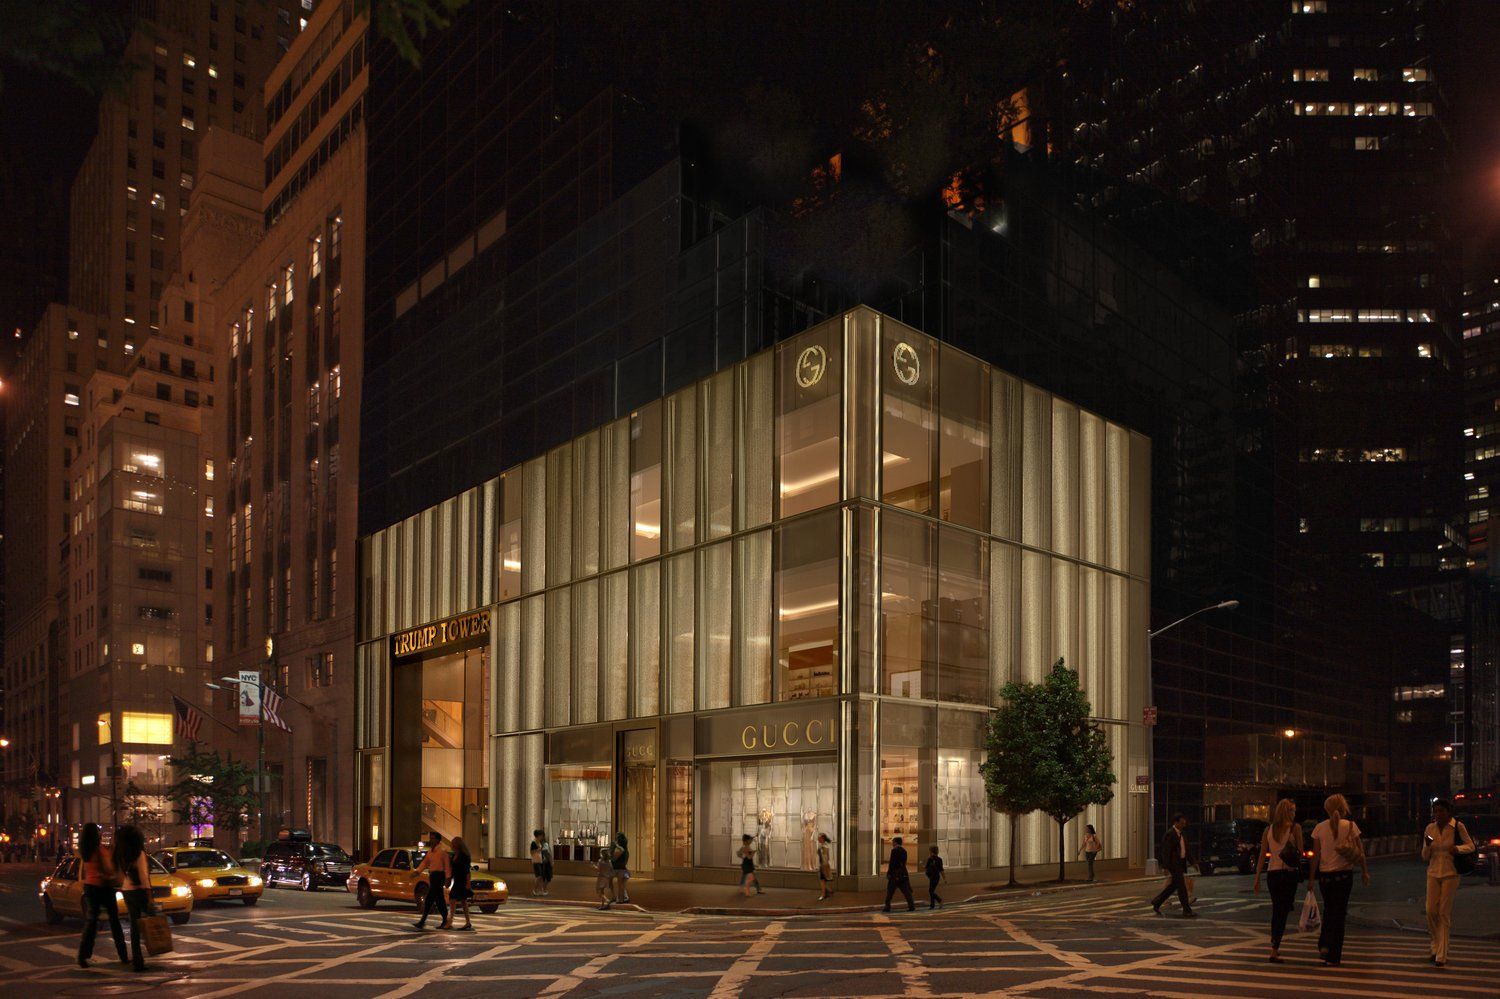 World’s Largest Gucci Store: Gucci New York Fifth Avenue Flagship Store sets world record